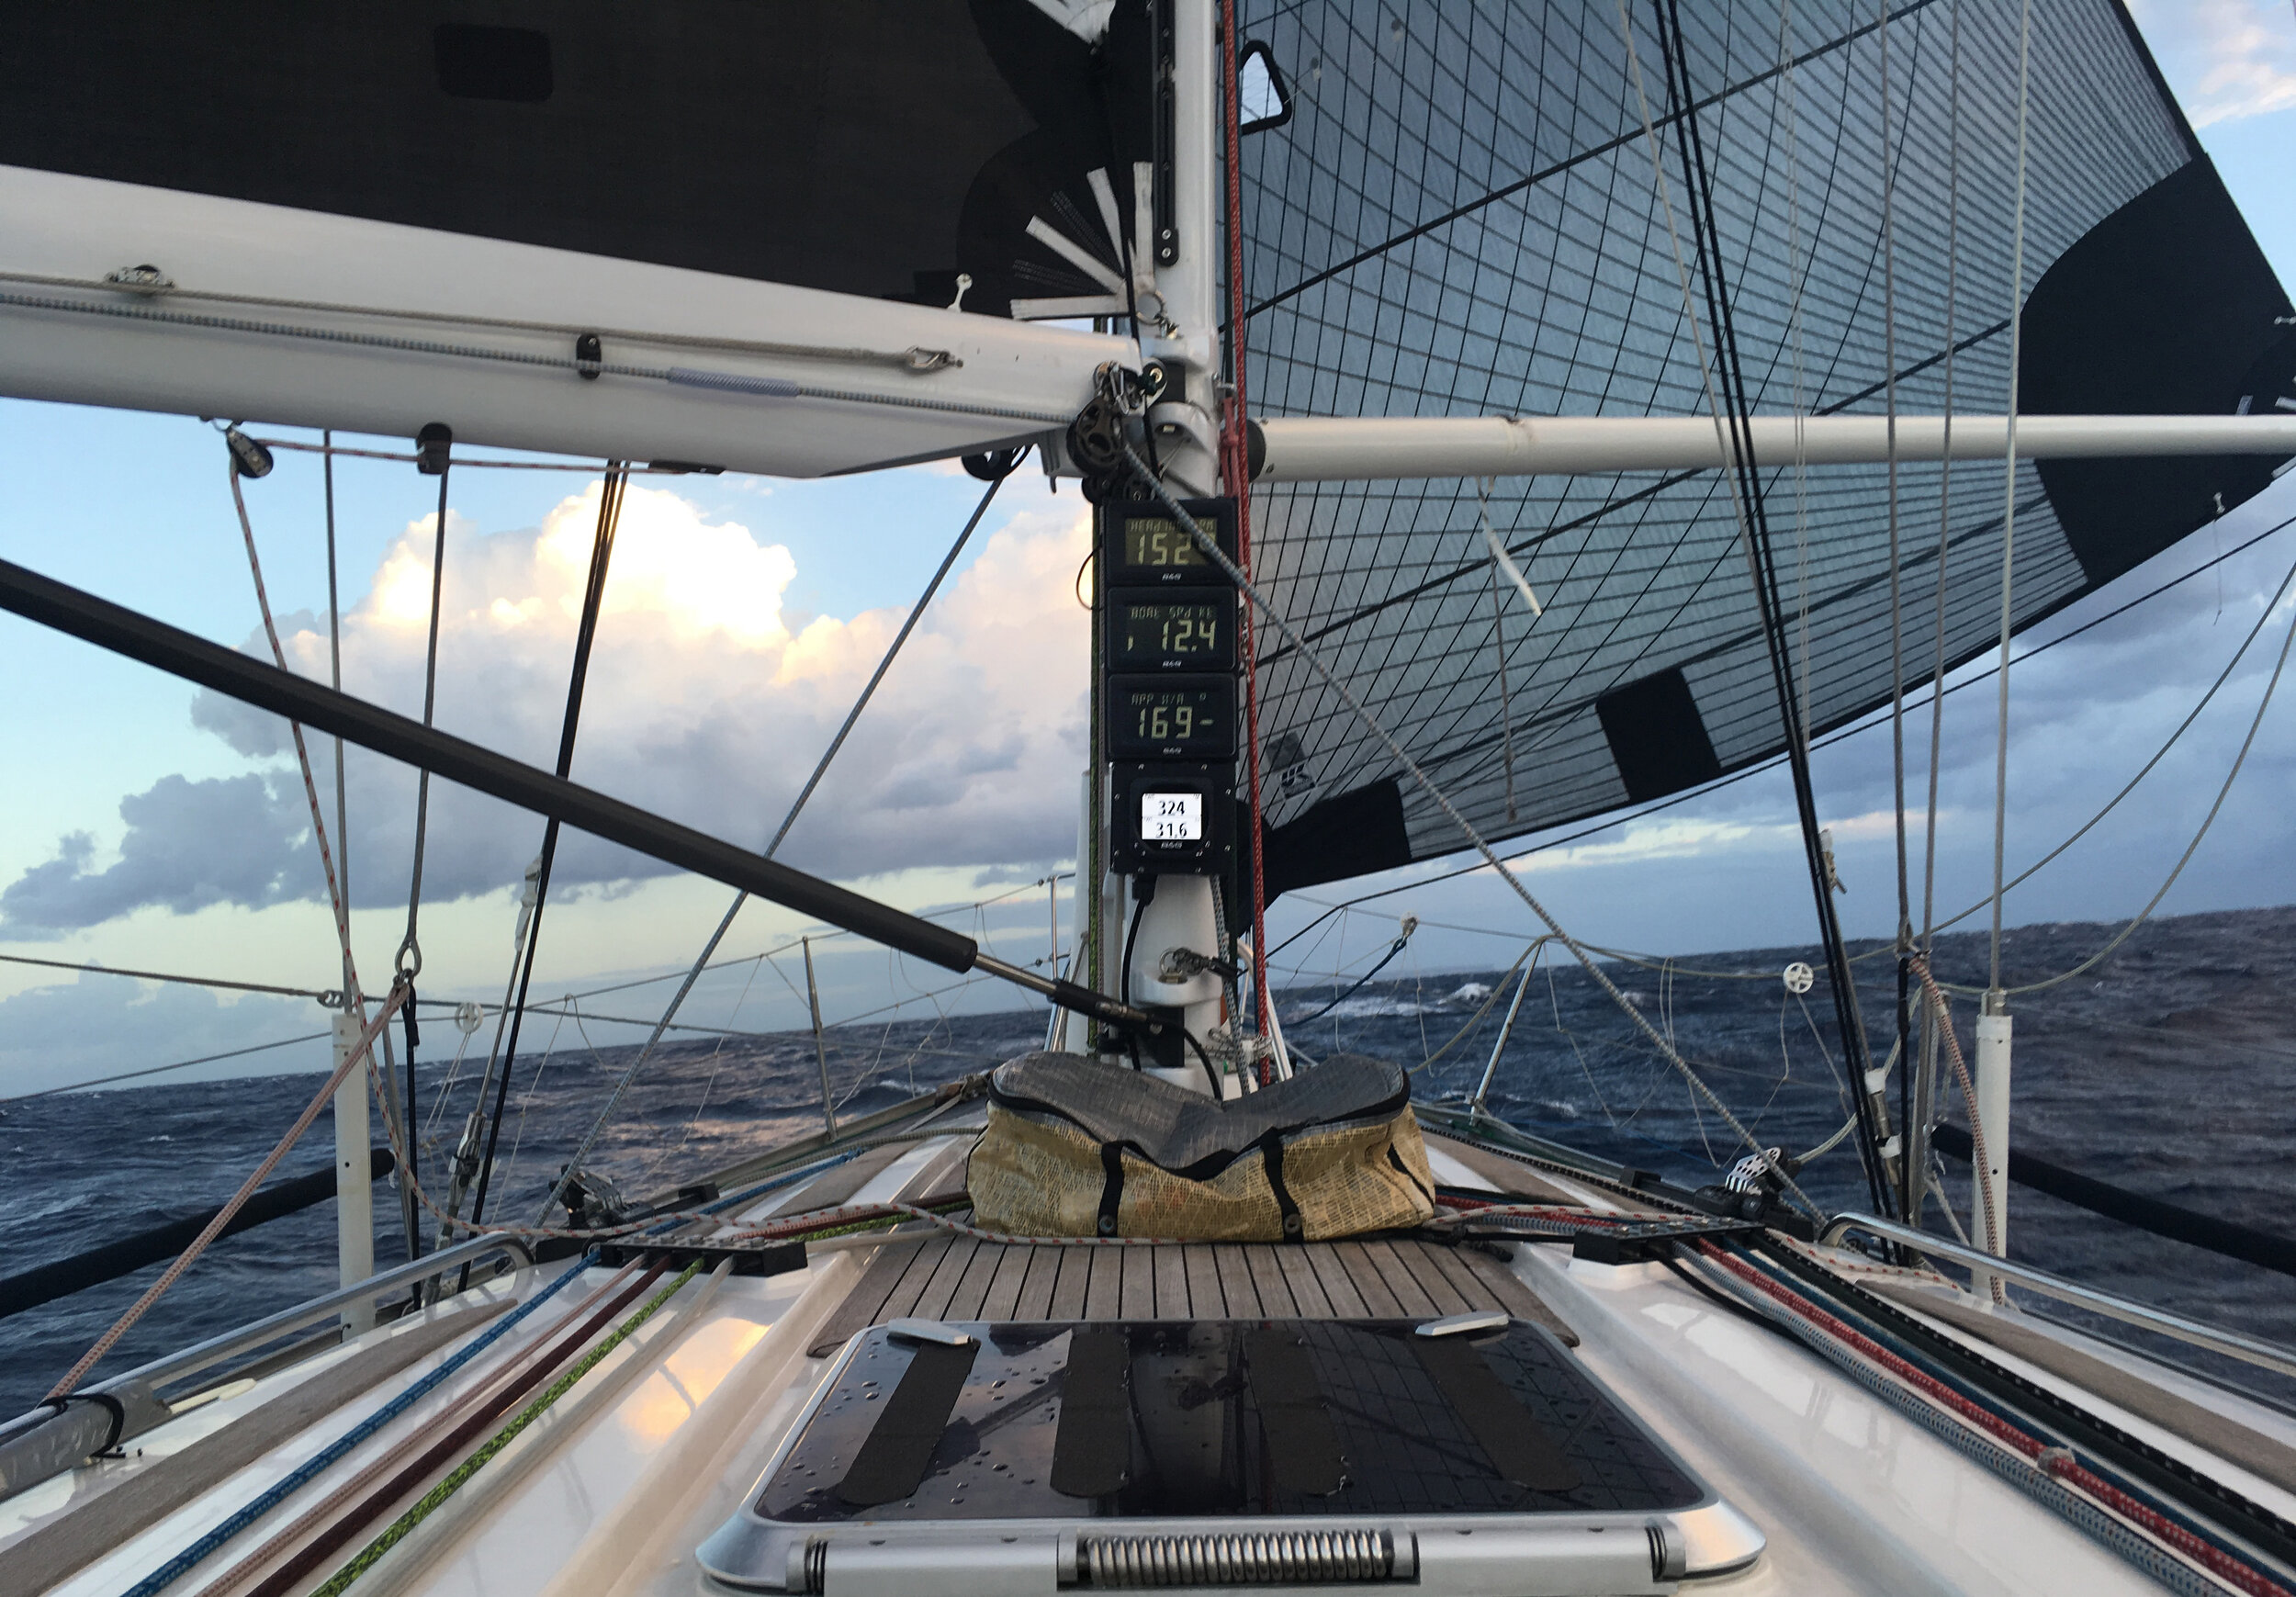 Joe Mele’s Swan 44 TRIPLE LINDY sailing dead downwind in the 2017 Middle Sea Race. The instruments are reading:  Heading: 152° Boatspeed: 12.4 knots Apparent Wind Angle: 169° True Wind Direction: 324° True Wind Speed: 31.6 knots